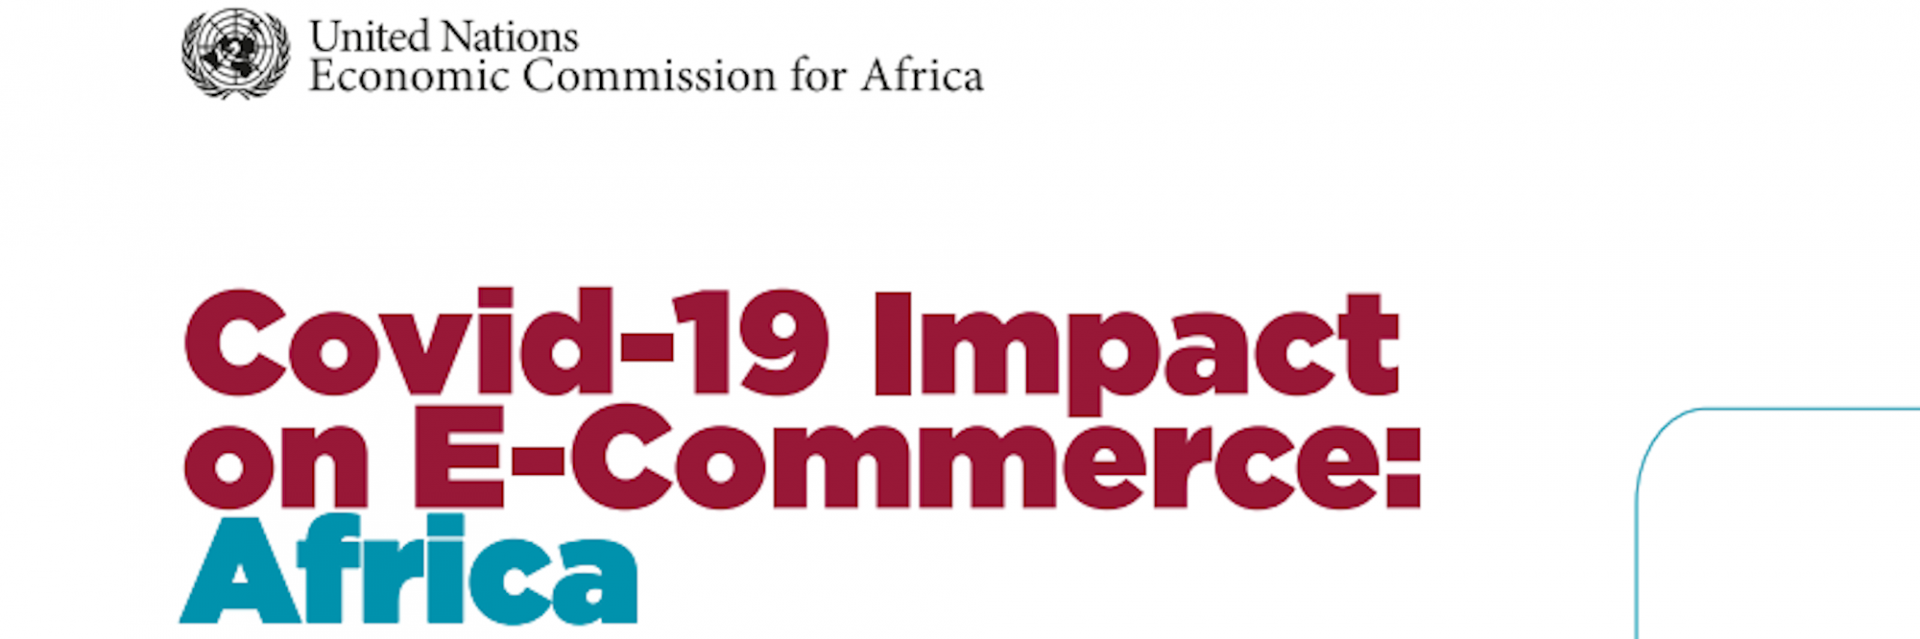 ECA launches report on impact of COVID-19 on e-commerce in Africa; seeks harmonized policy under AfCFTA